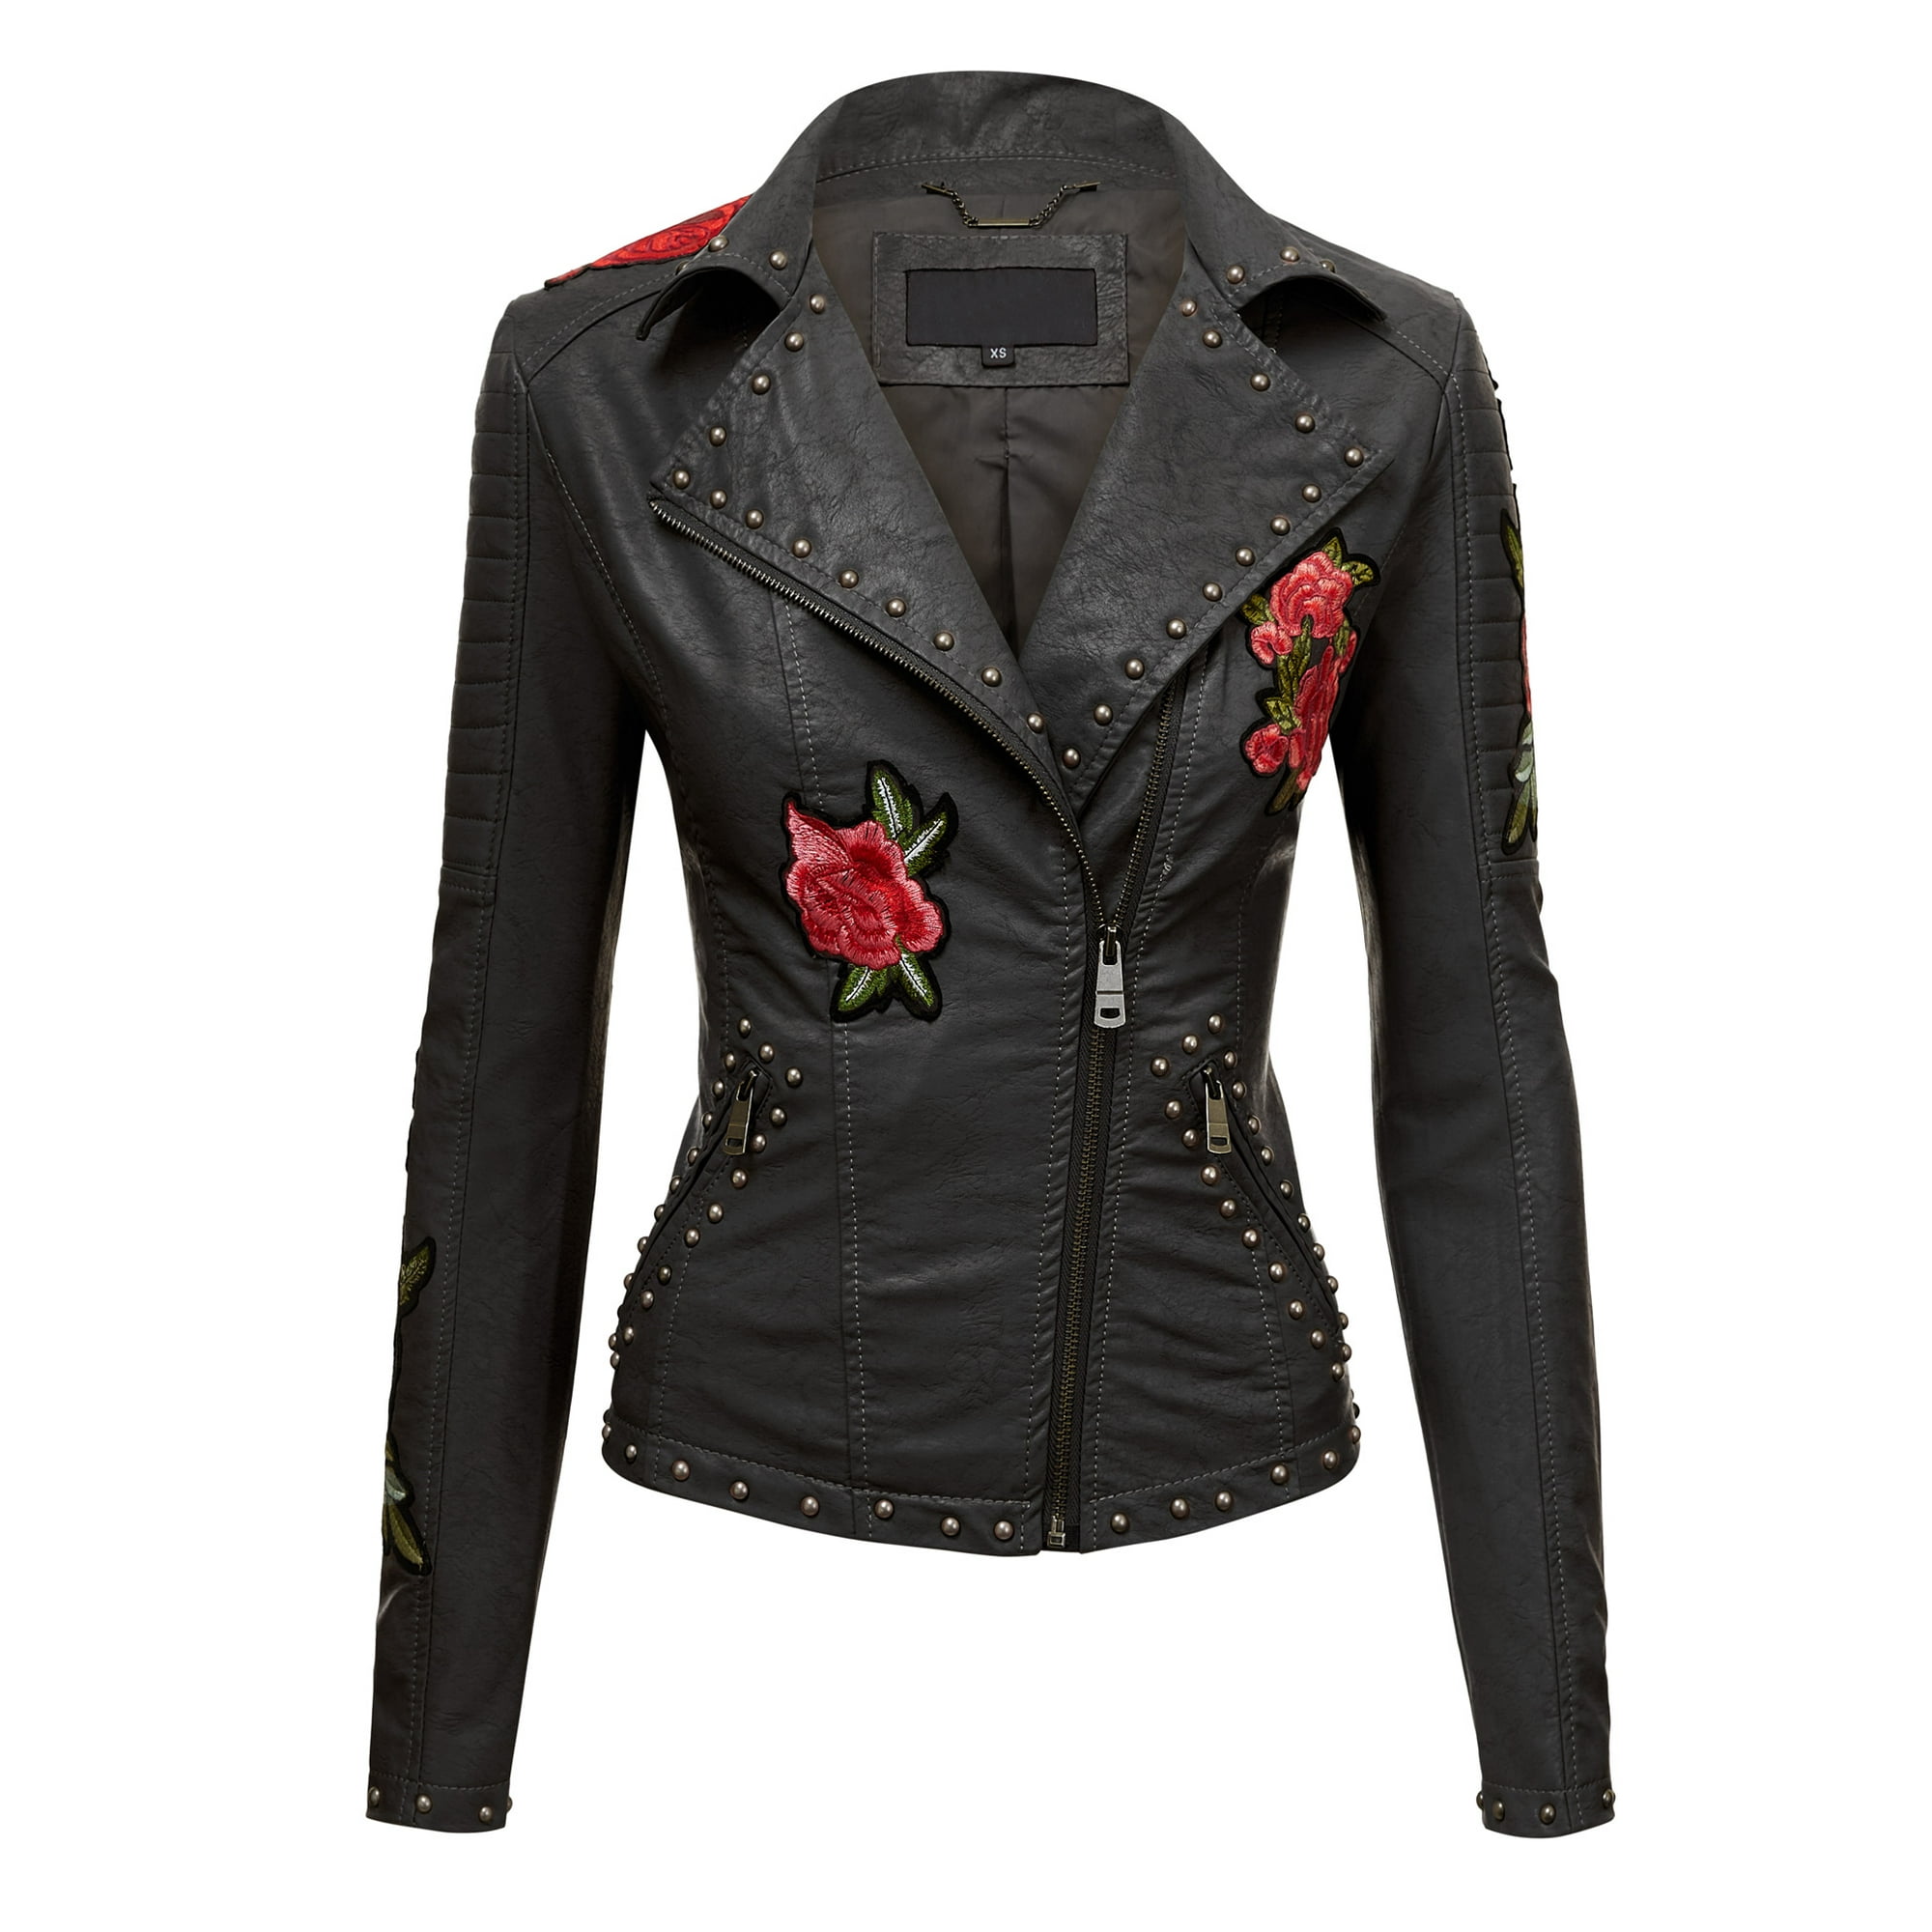 Floral Embroidered Faux Leather Jacket - Black Women's Size Medium